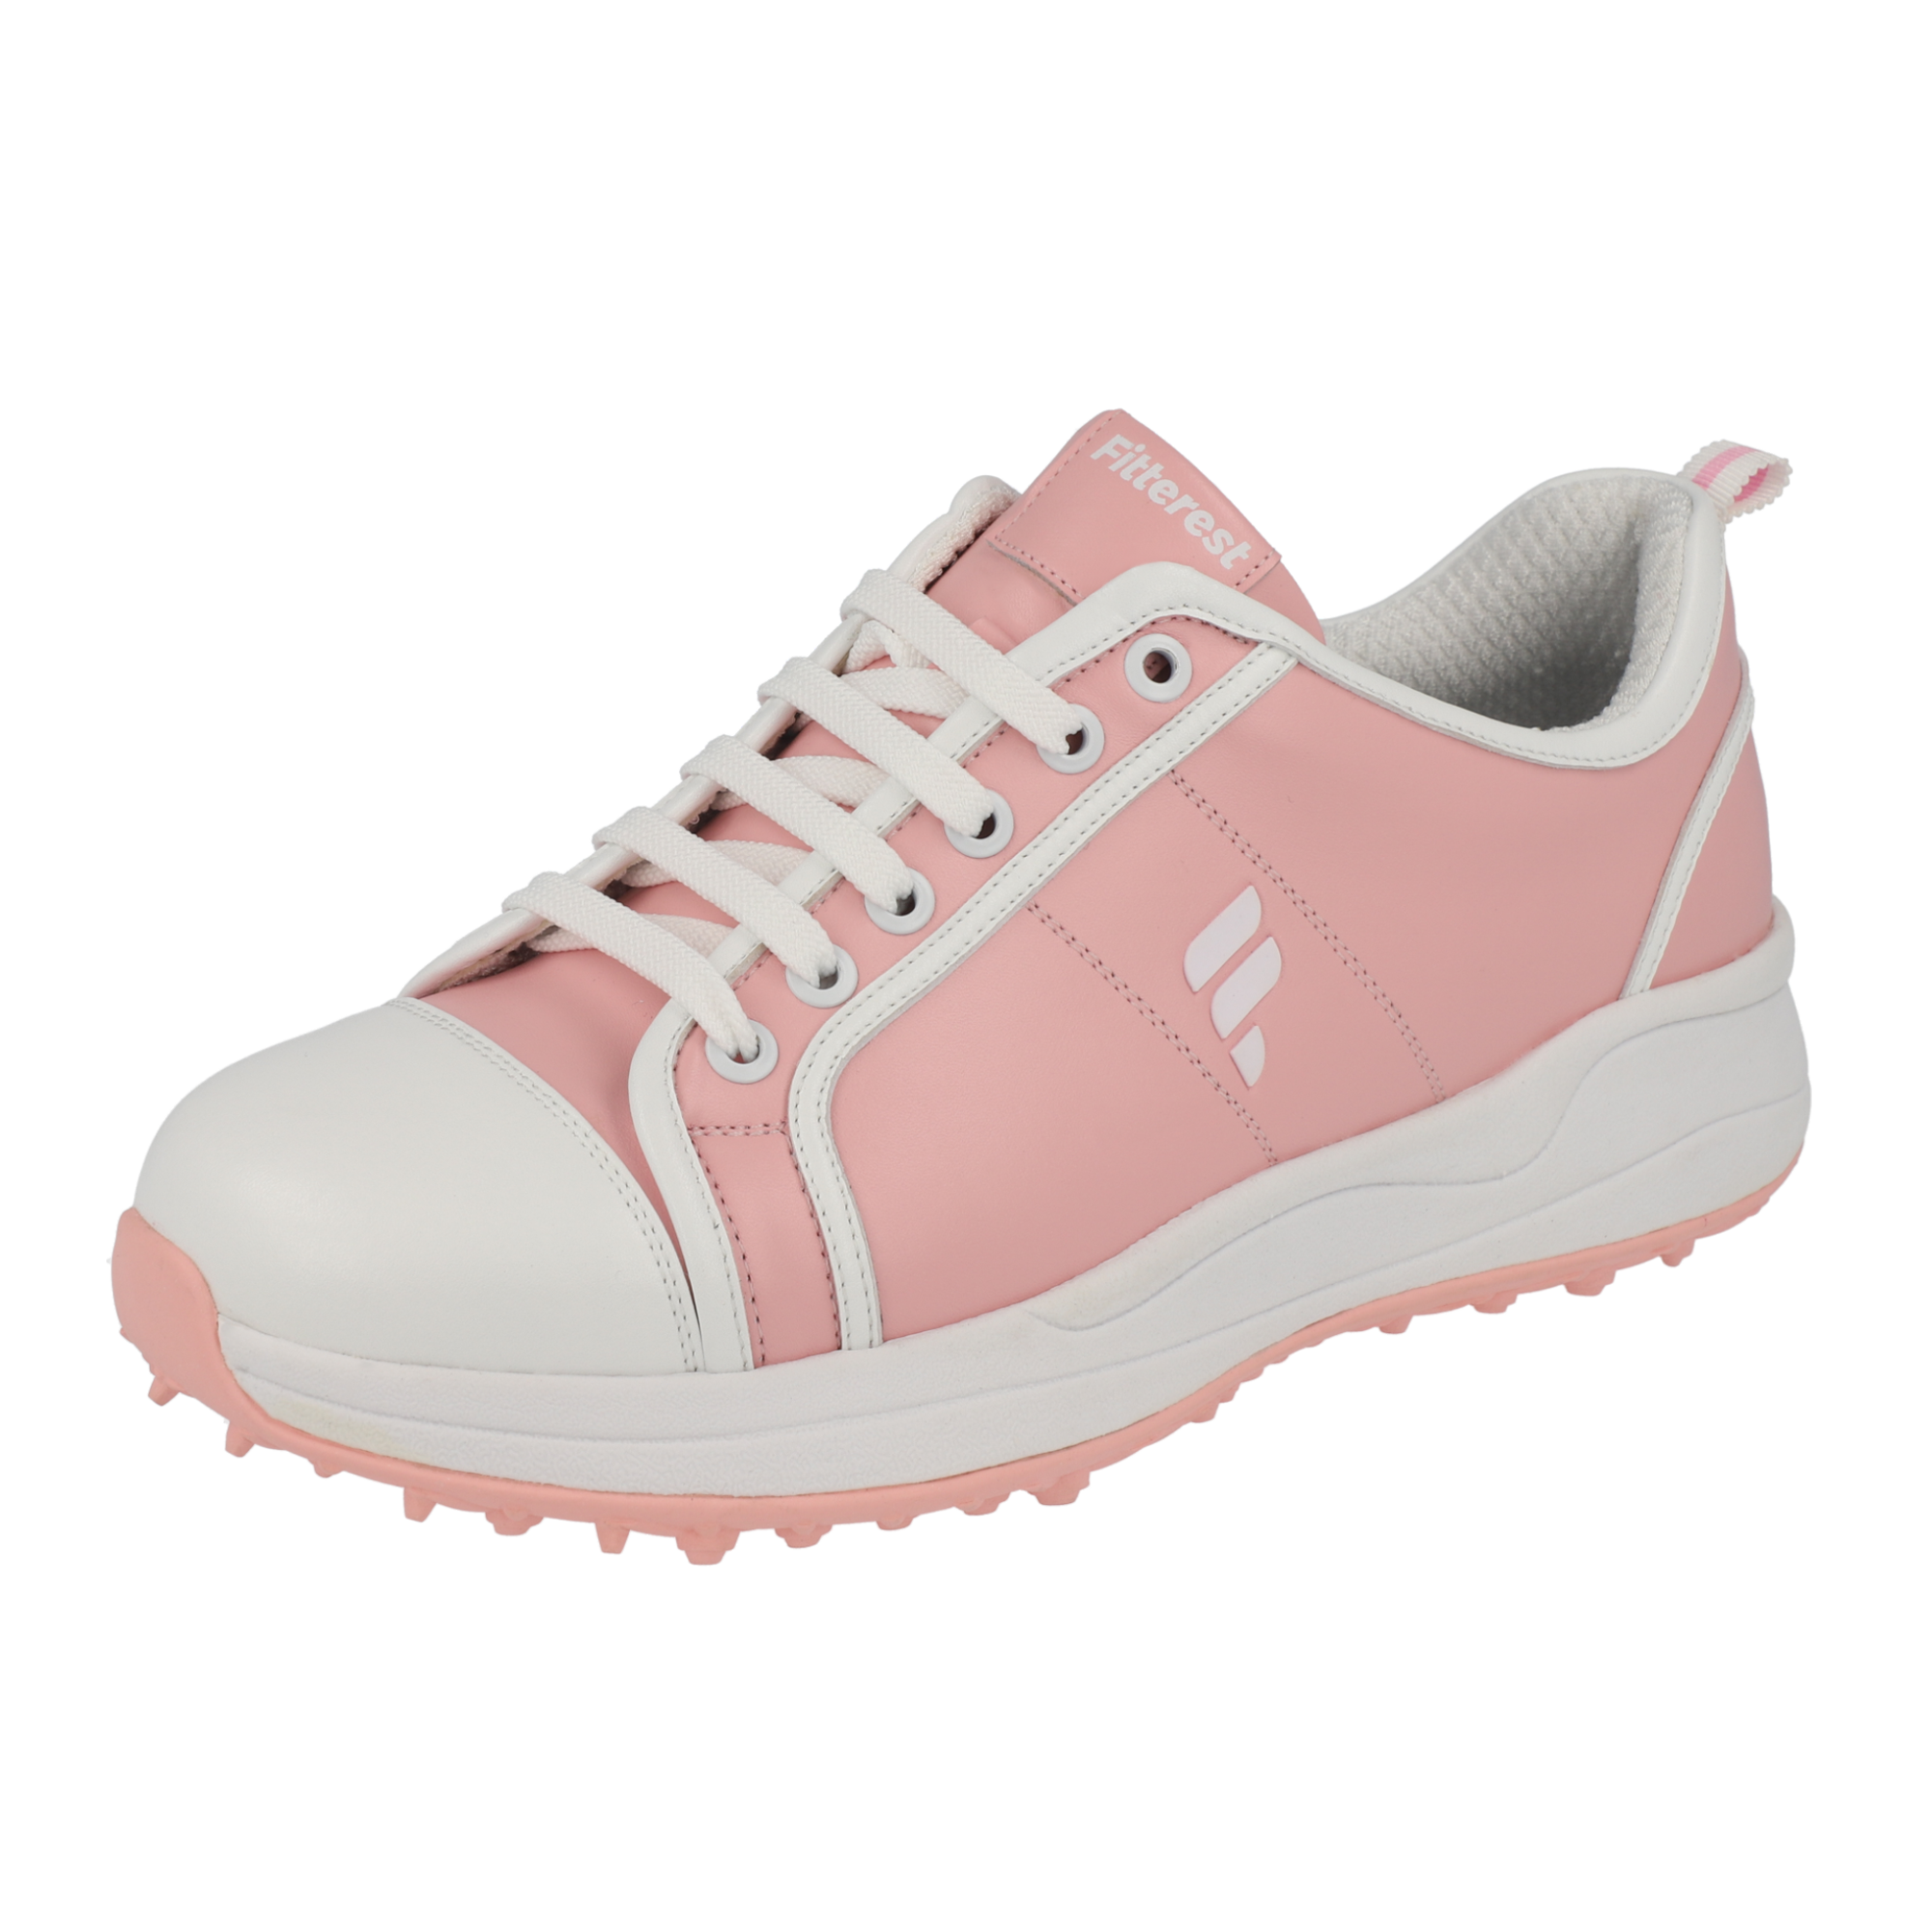 FITTEREST Spider Wave Golf Shoes for Women - FTR23 W SS PN209